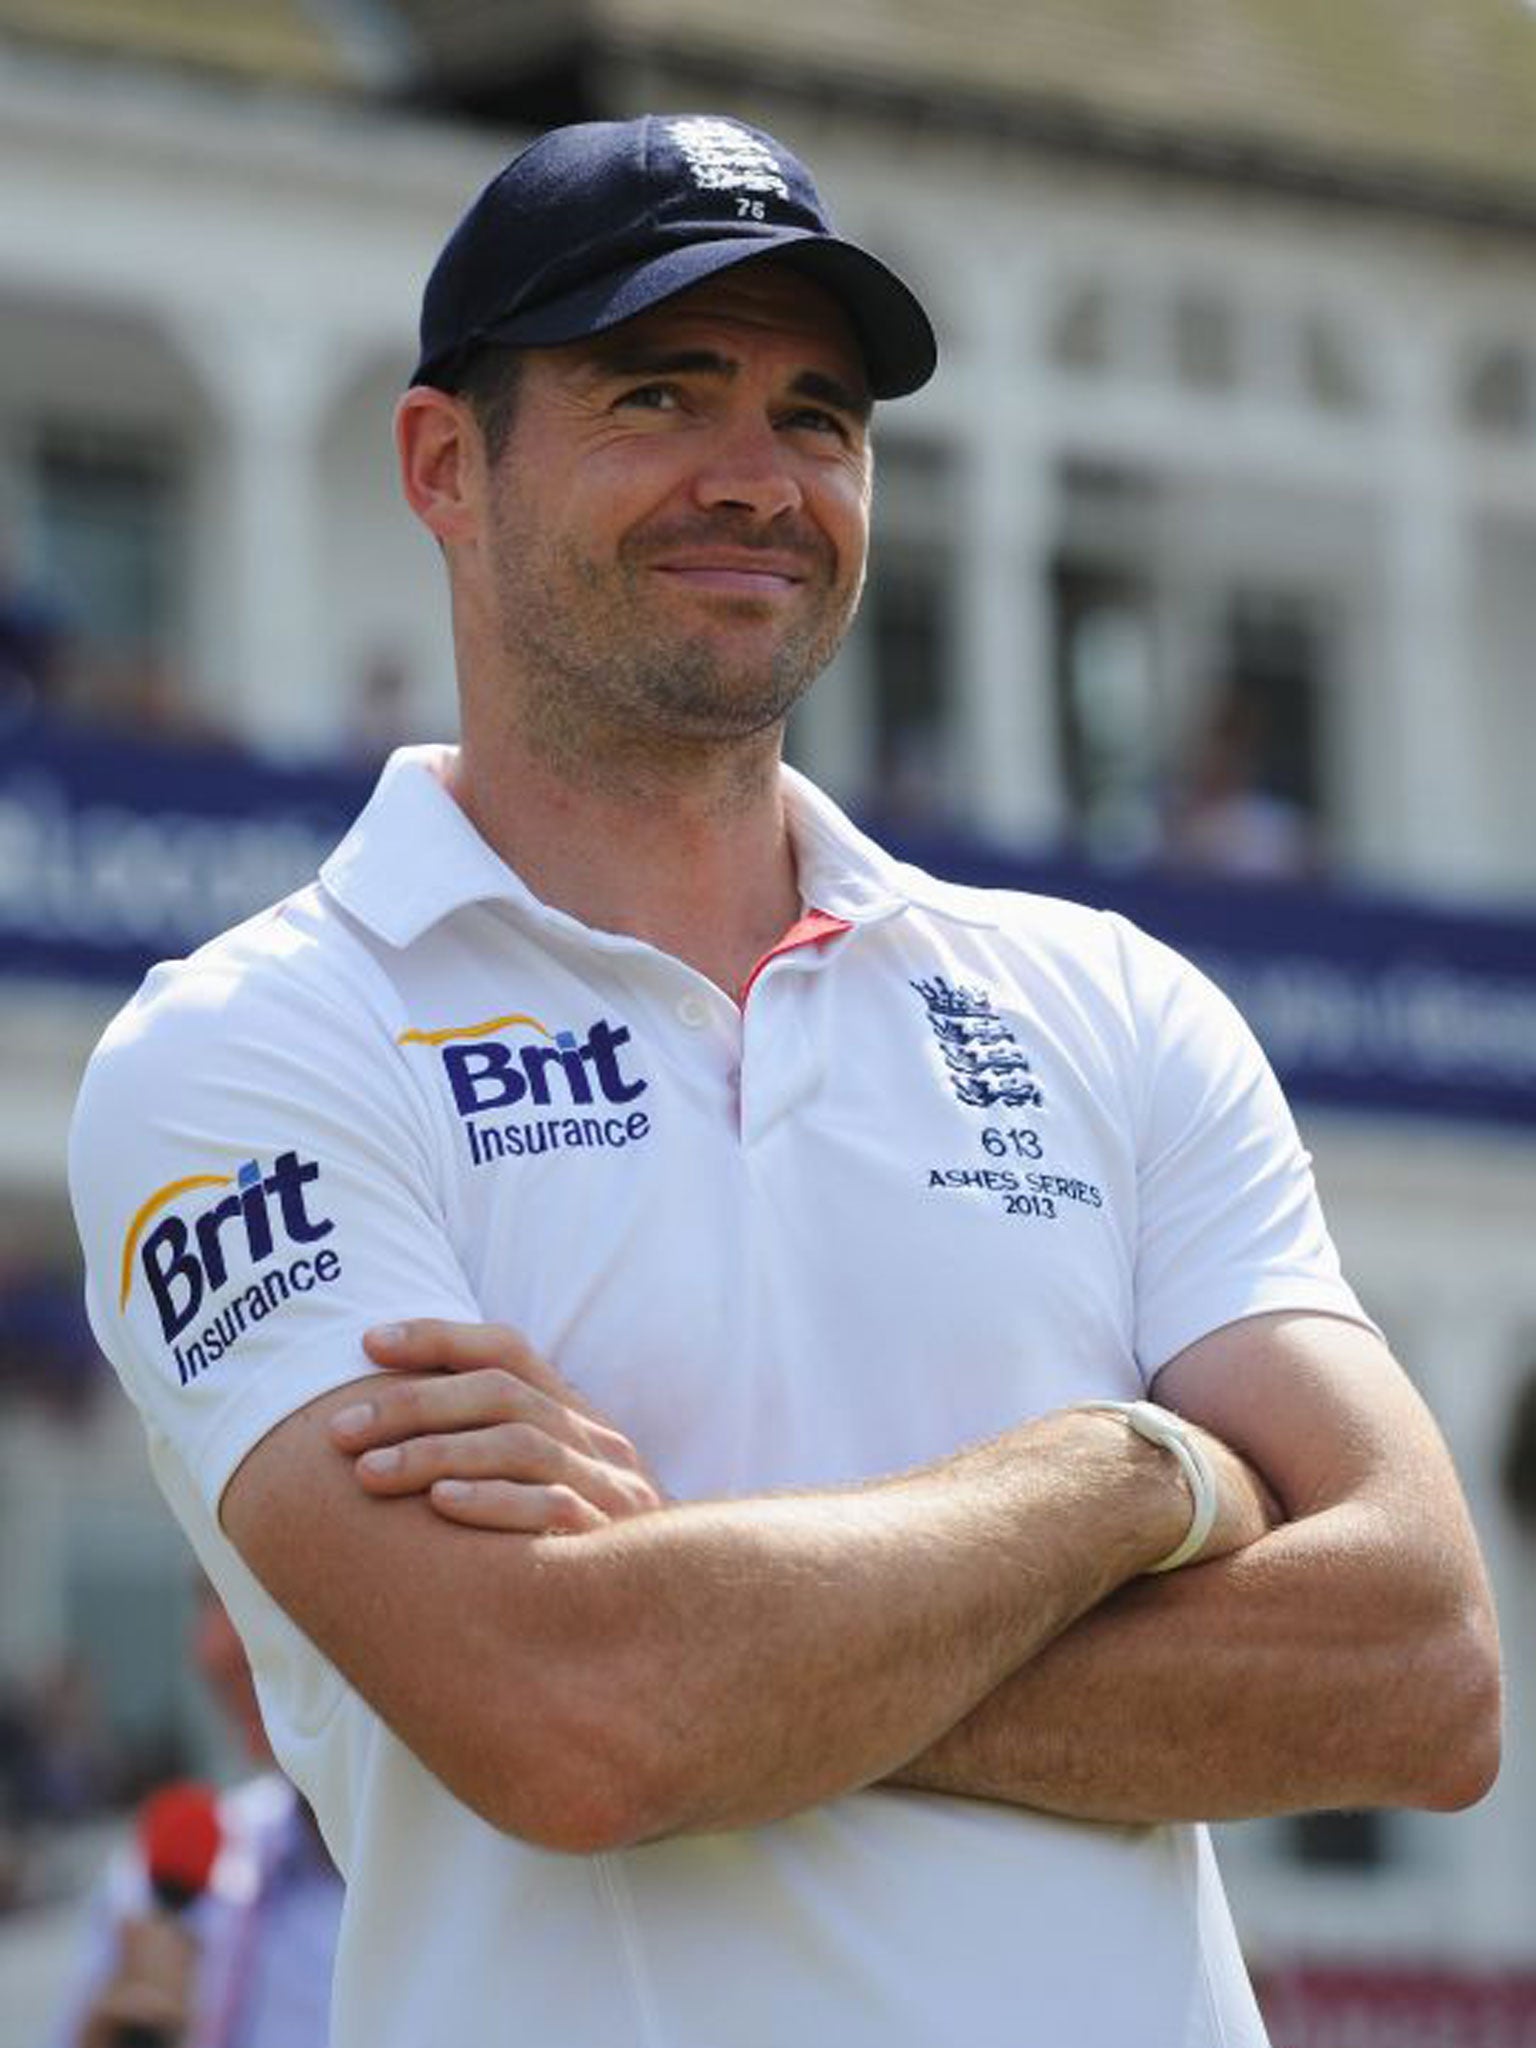 James Anderson – 9 With 5-wicket hauls in both innings, it was no surprise Anderson was named man of the match. Moved up to third in England’s all-time wicket takers list and was a constant threat to Australia’s batsmen. England will be praying he s